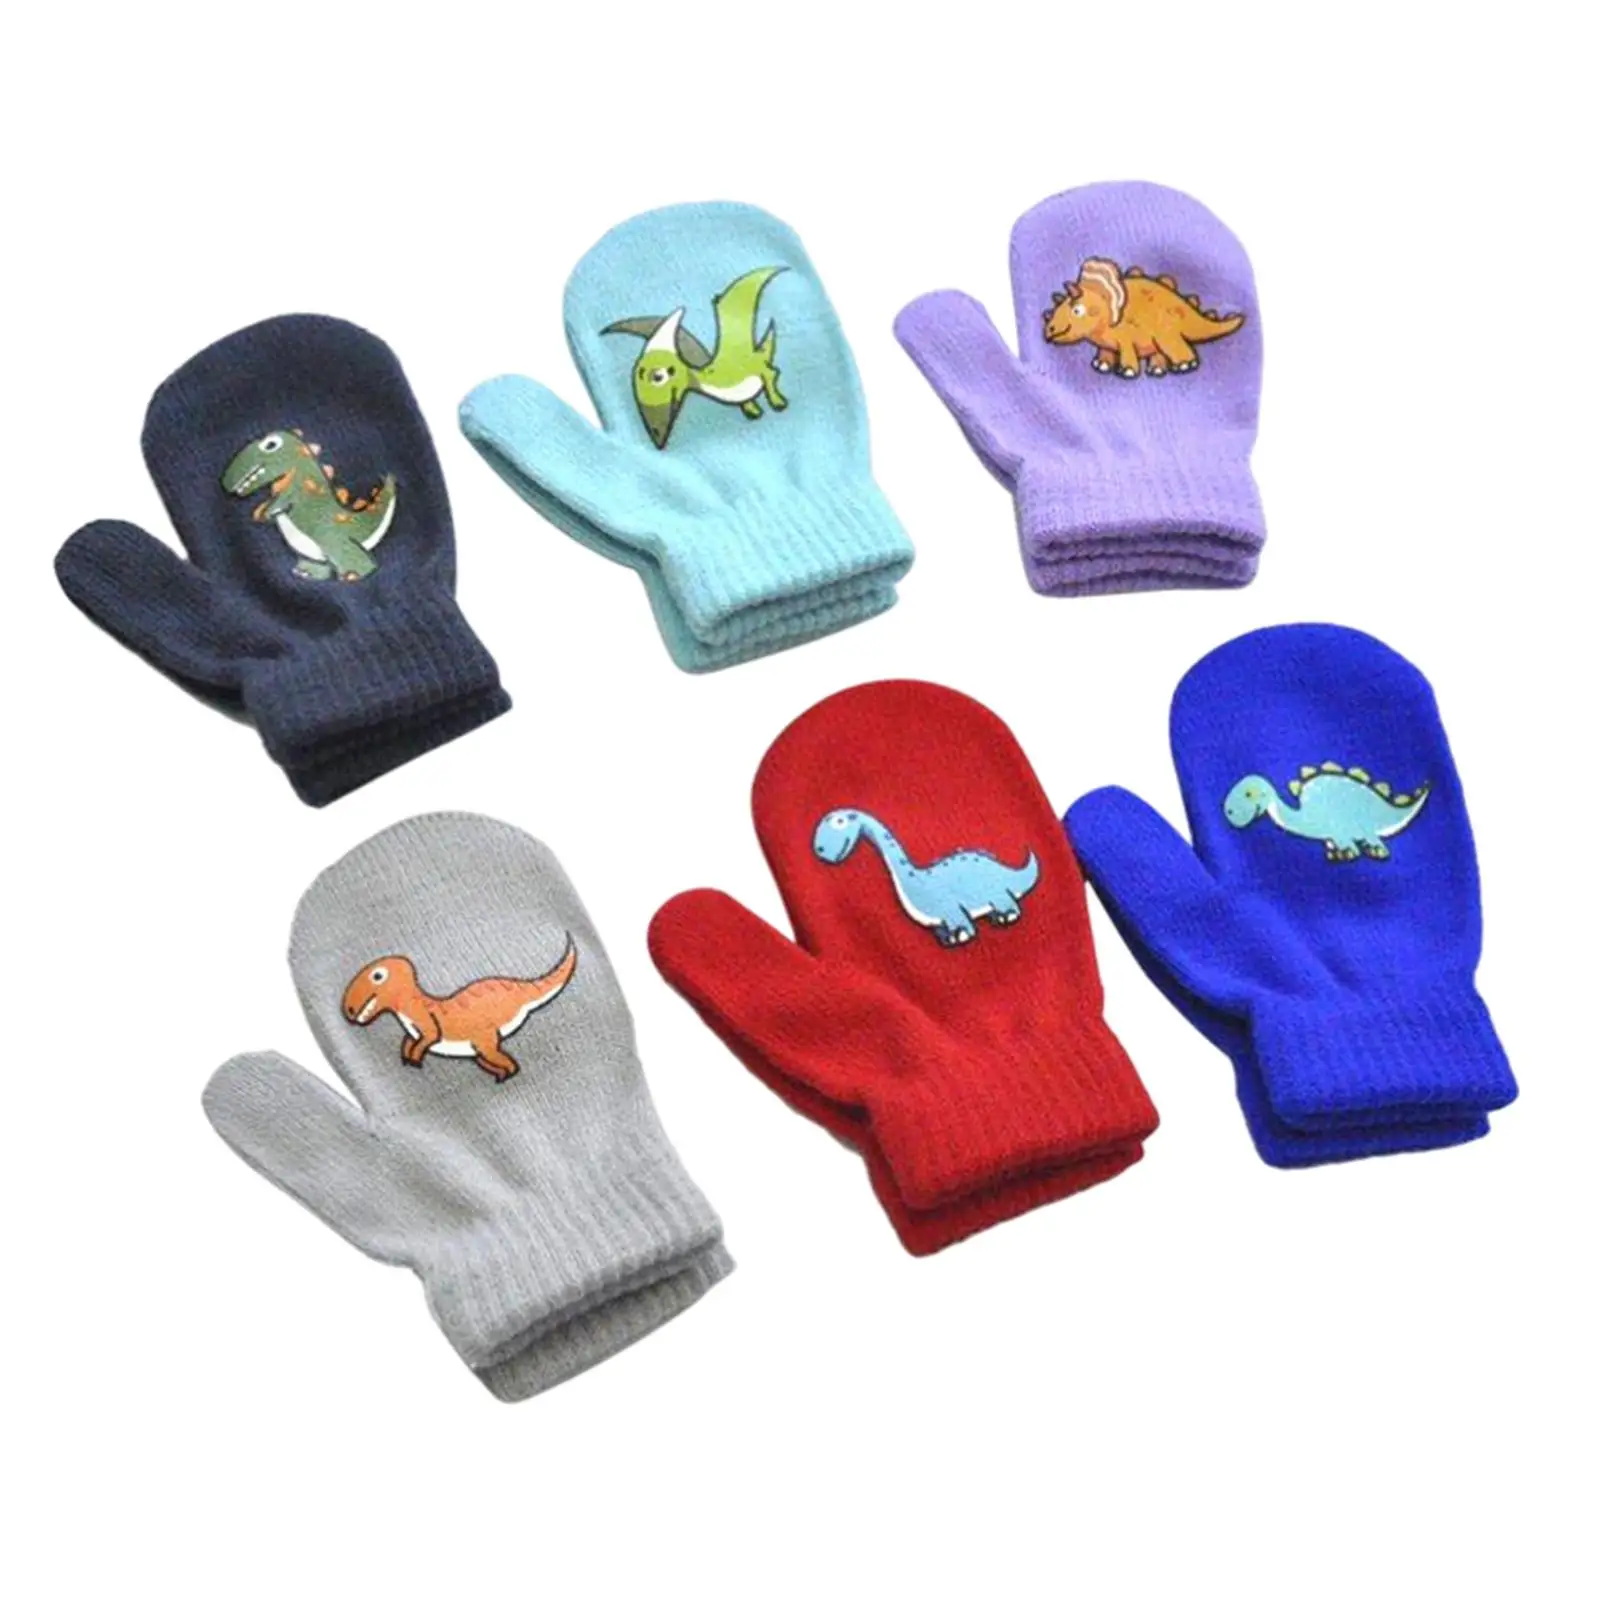 6 Pairs Kids Winter Gloves Stretch Knitted for 5 to 12 Years Old Child Lightweight Daily Use Reusable Comfortable to Wear Soft